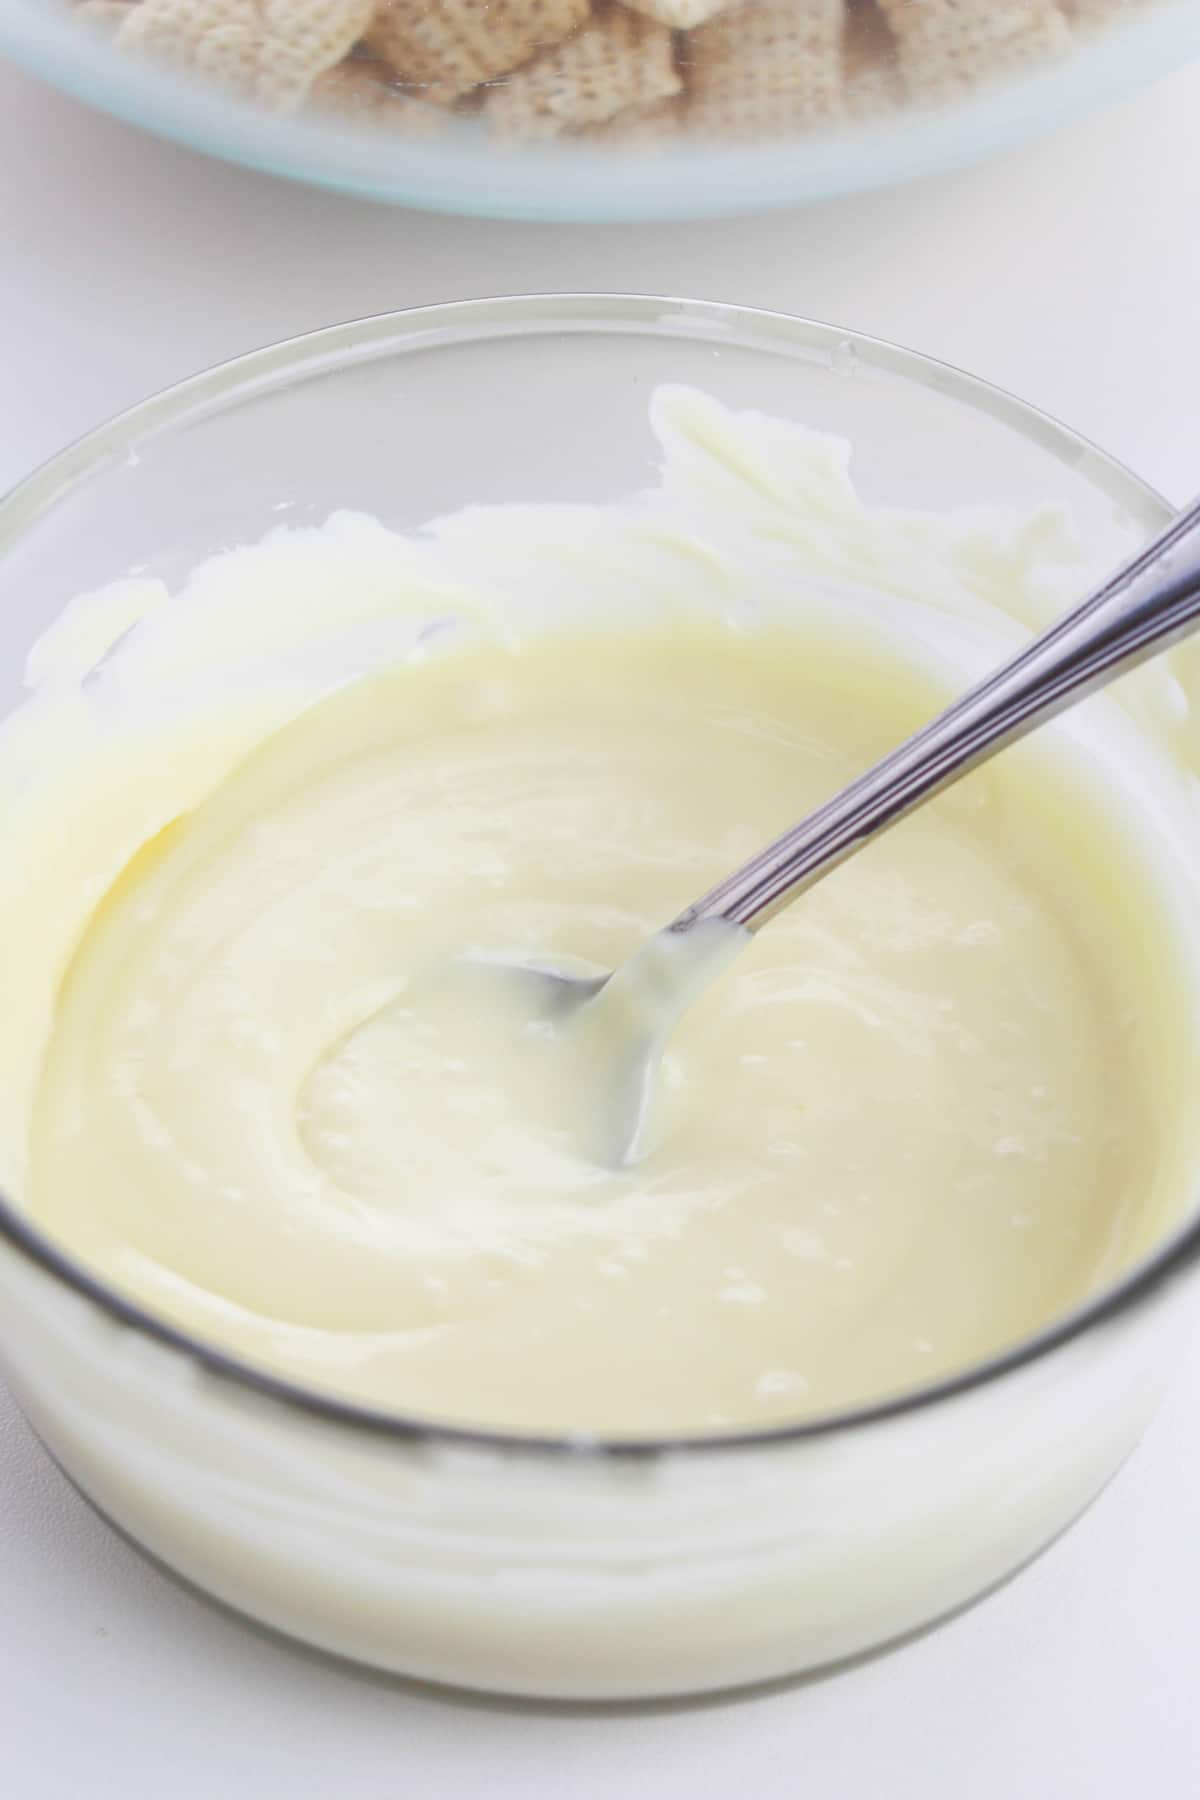 A bowl of melted white chocolate.